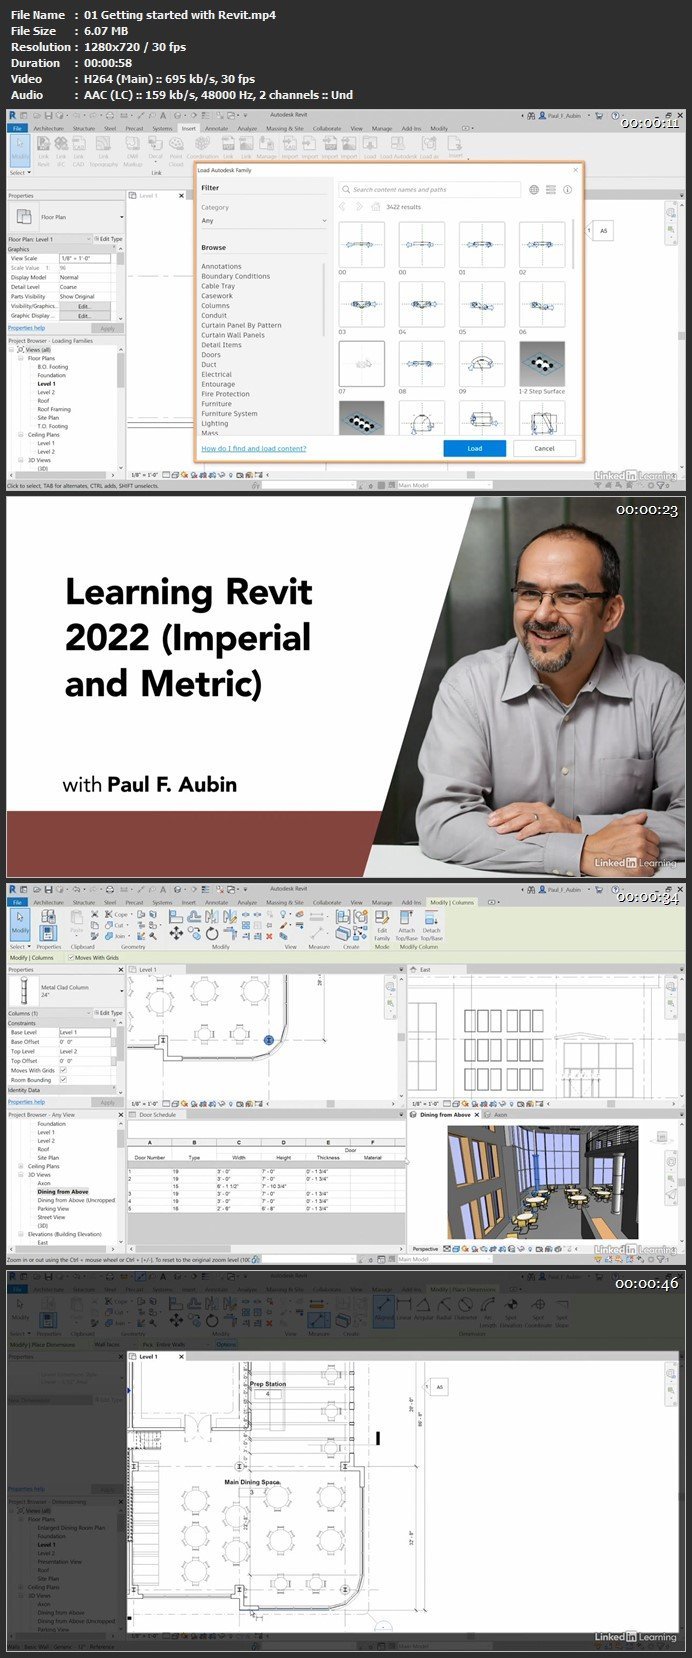 Learning Revit 2022 (Imperial and Metric)